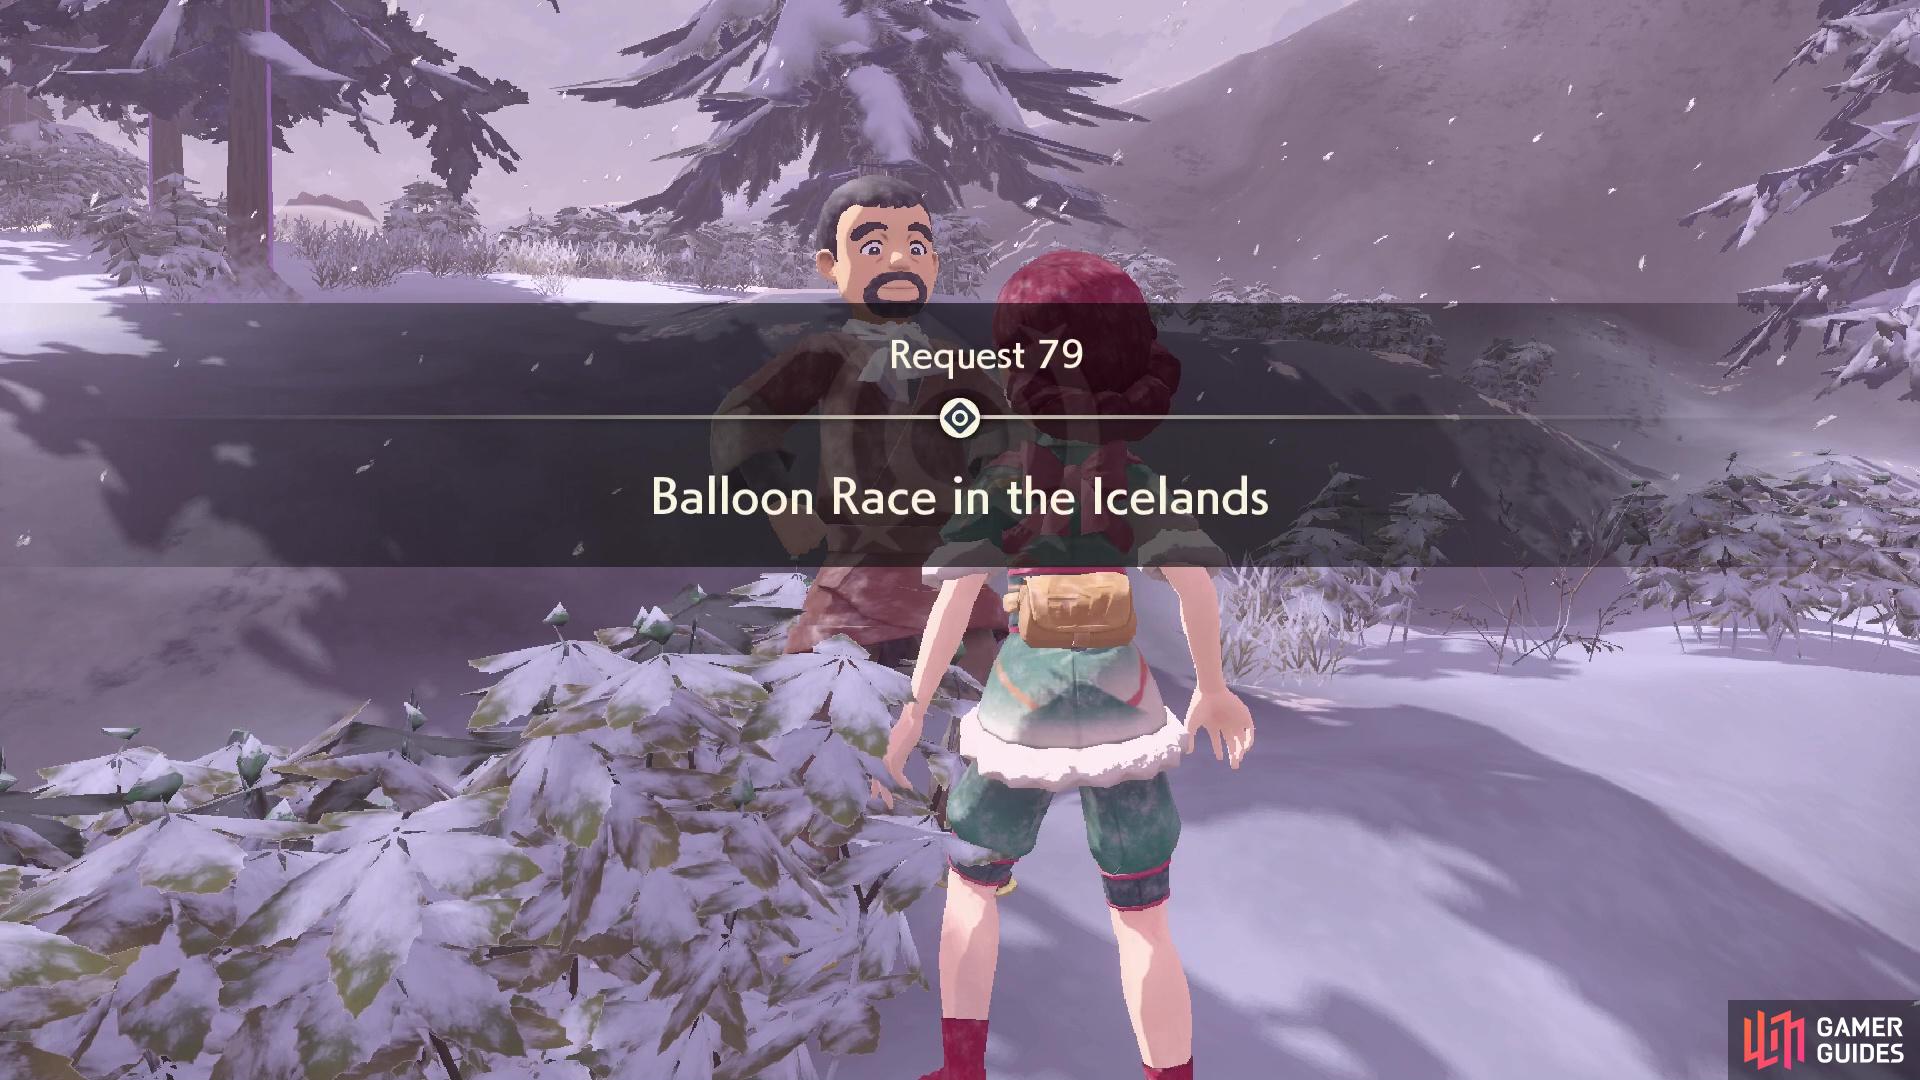 Request 79: Balloon Race in the Icelands.